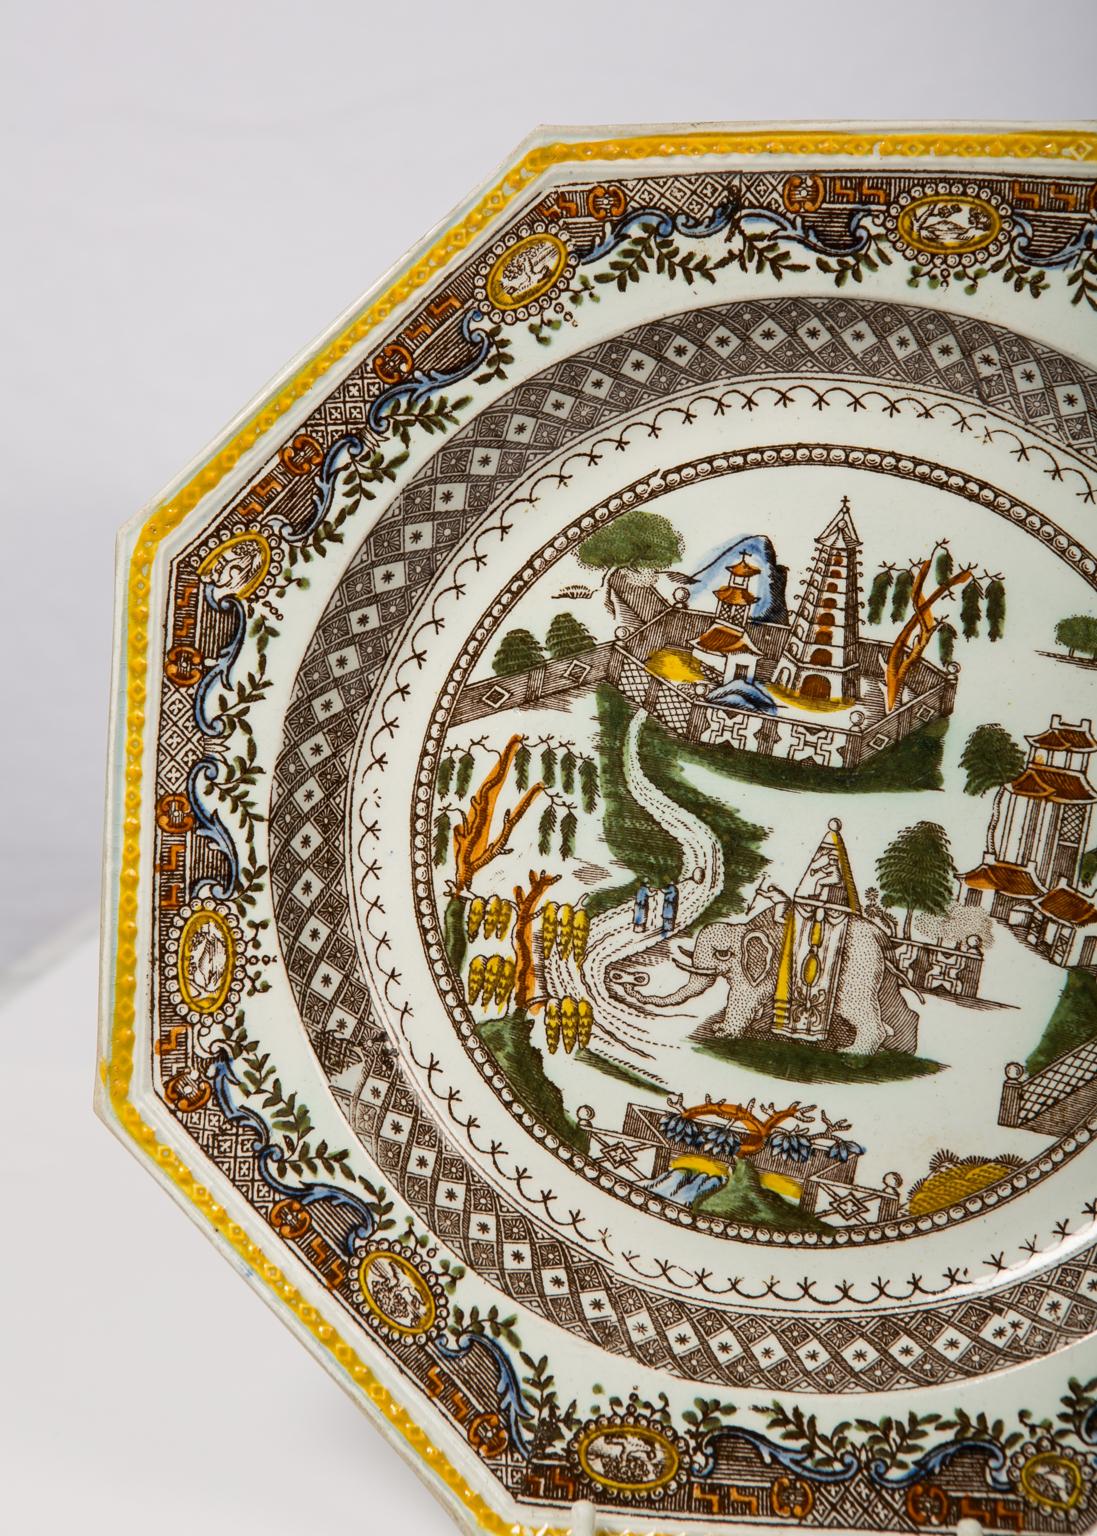  Pair Antique Plates Showing an Elephant in an Imaginary Asian Setting For Sale 1